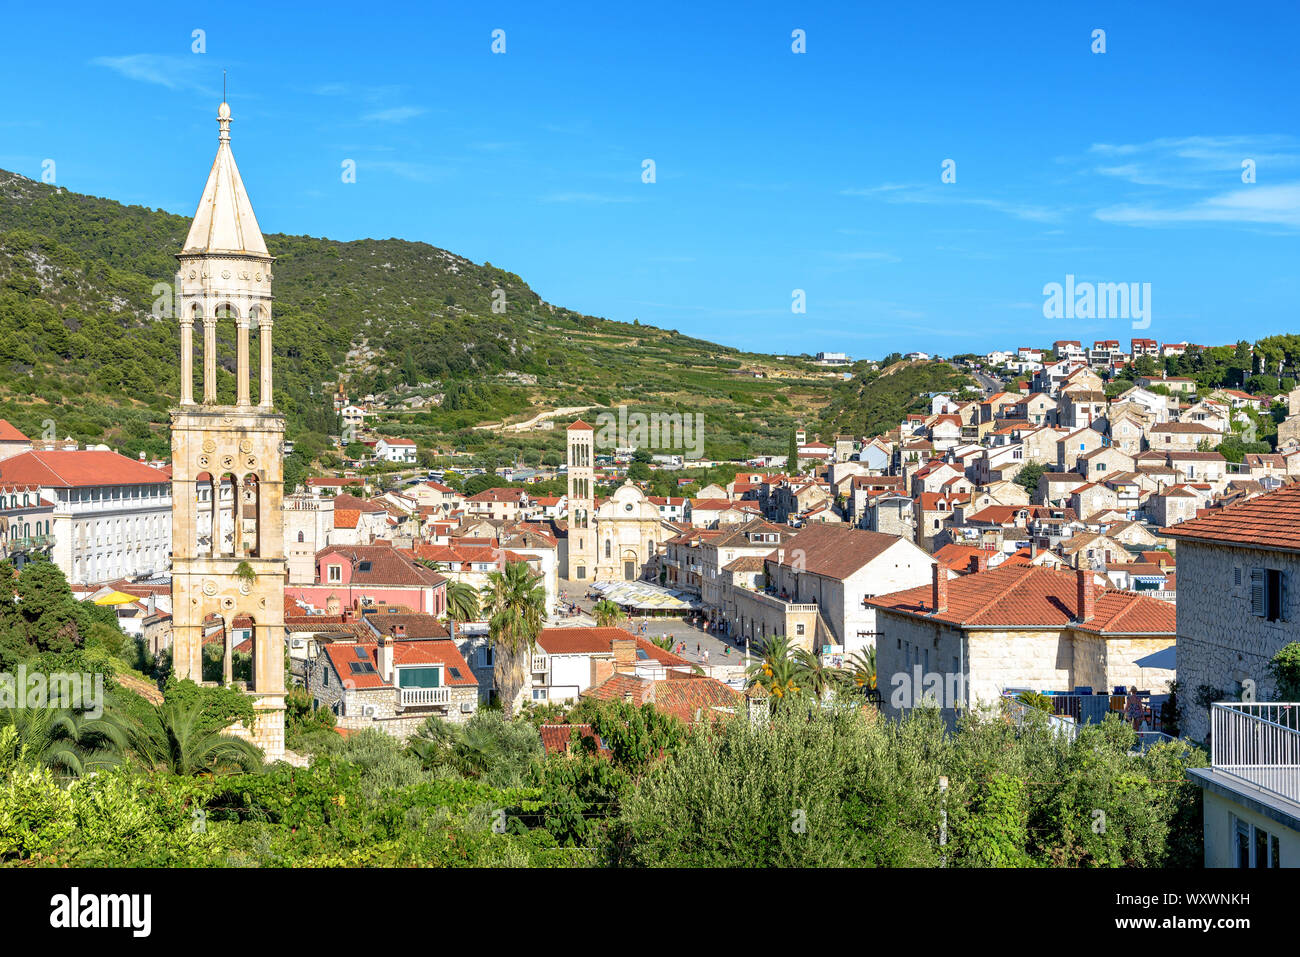 The bell tower of the former St. Mark's Church (Crkva Sv. Marka) in Hvar, Croatia with Trg Sv. Stjepana and the town in the background Stock Photo